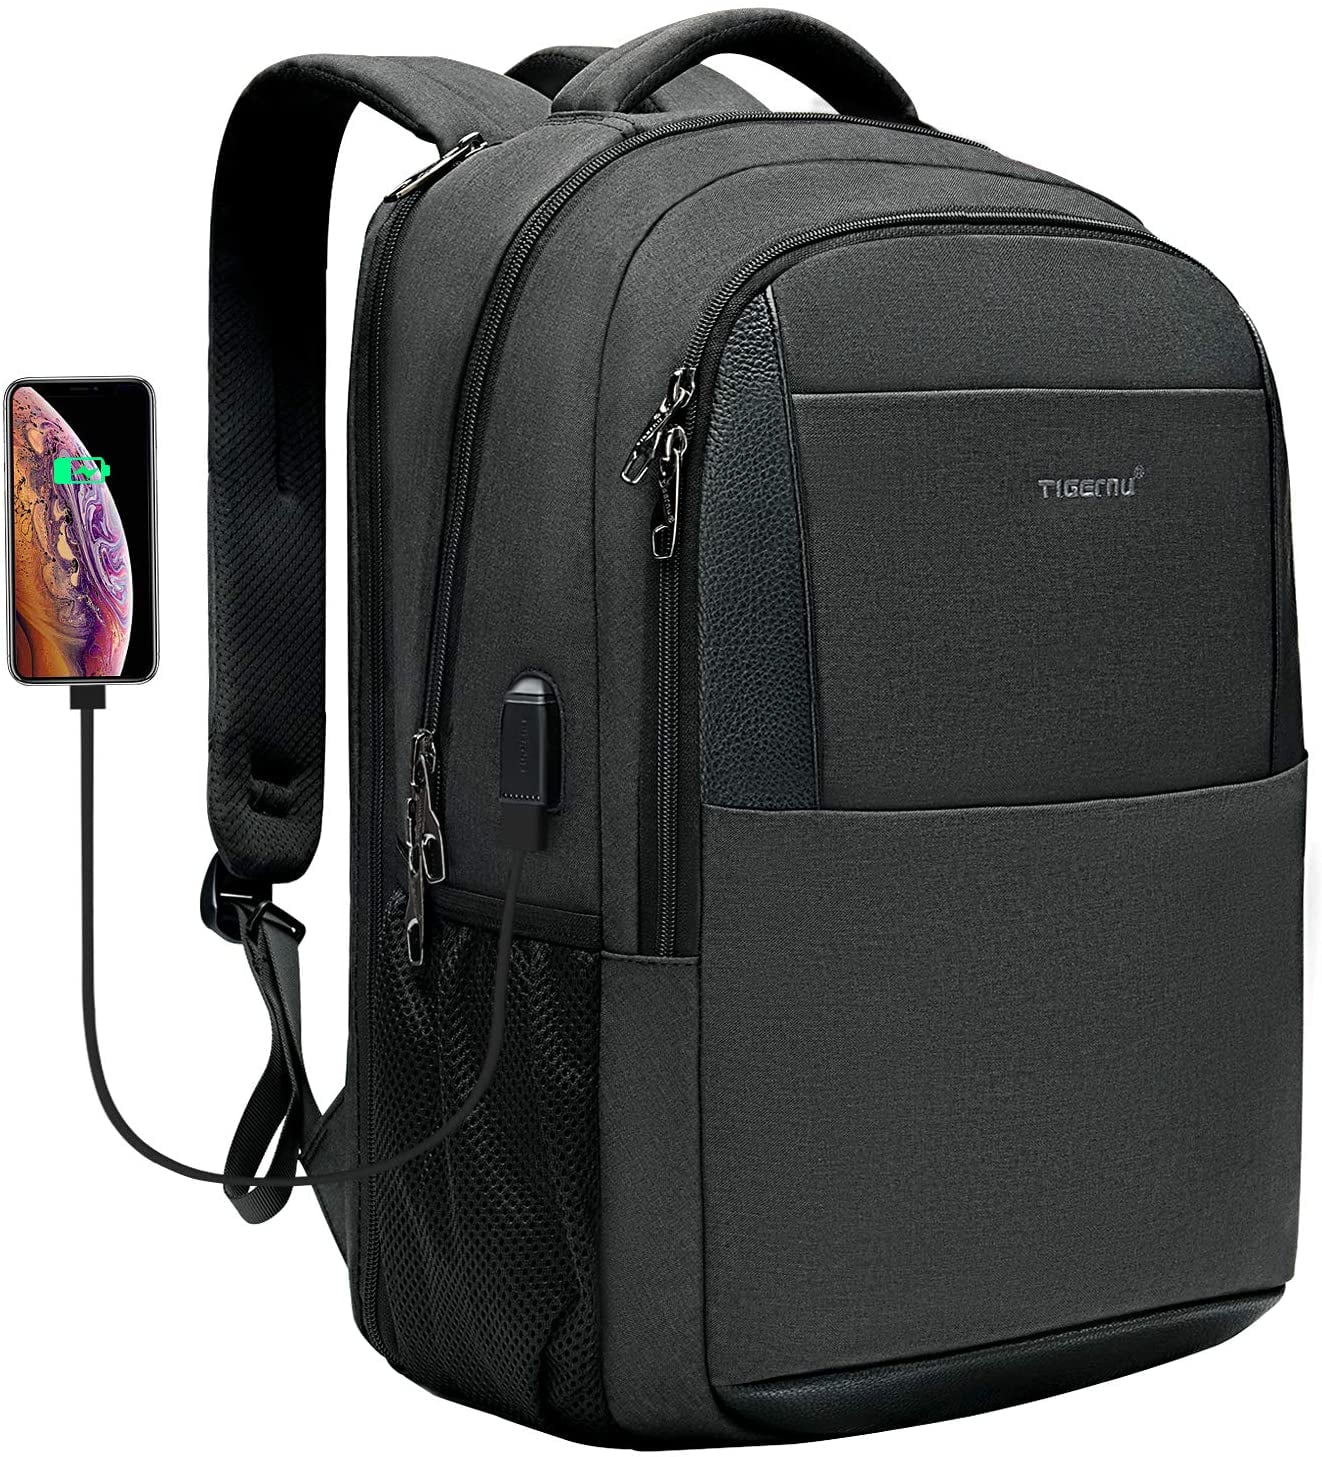 Laptop Backpack,Business Anti Theft Durable Bag Leisure Sling Daybag with USB Charging Port,Water Resistant